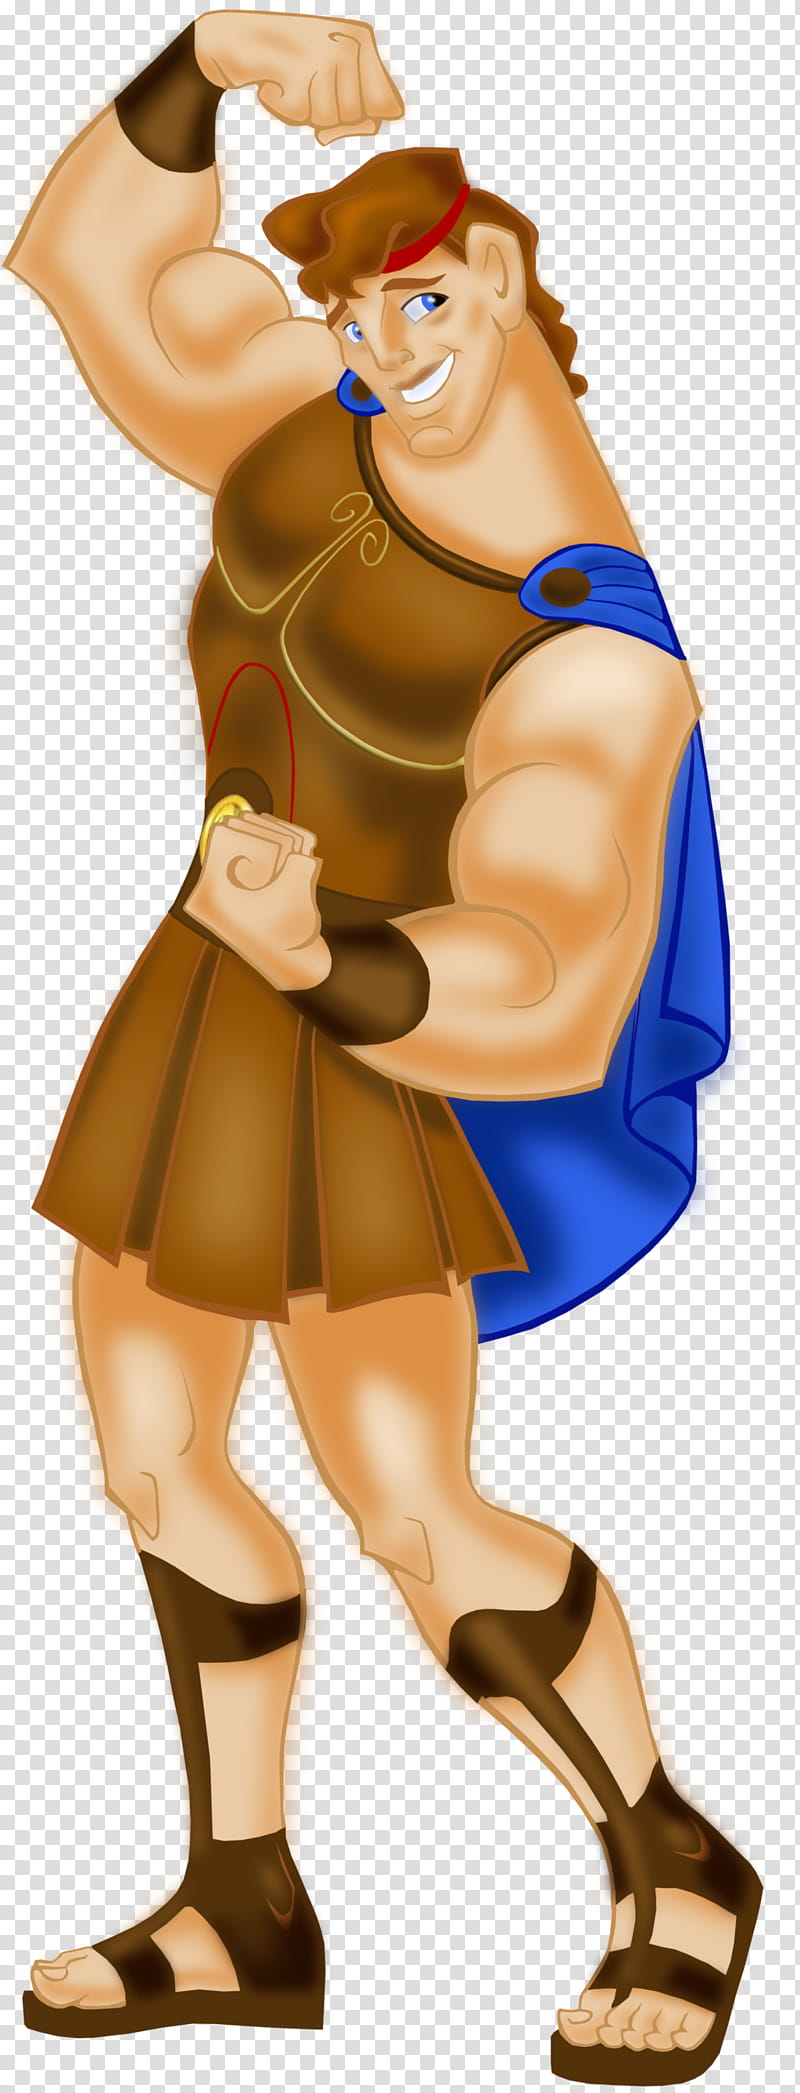 Cartoon, Character, Hercules, Hero, Muscle, Joint, Figurine, Finger transparent background PNG clipart